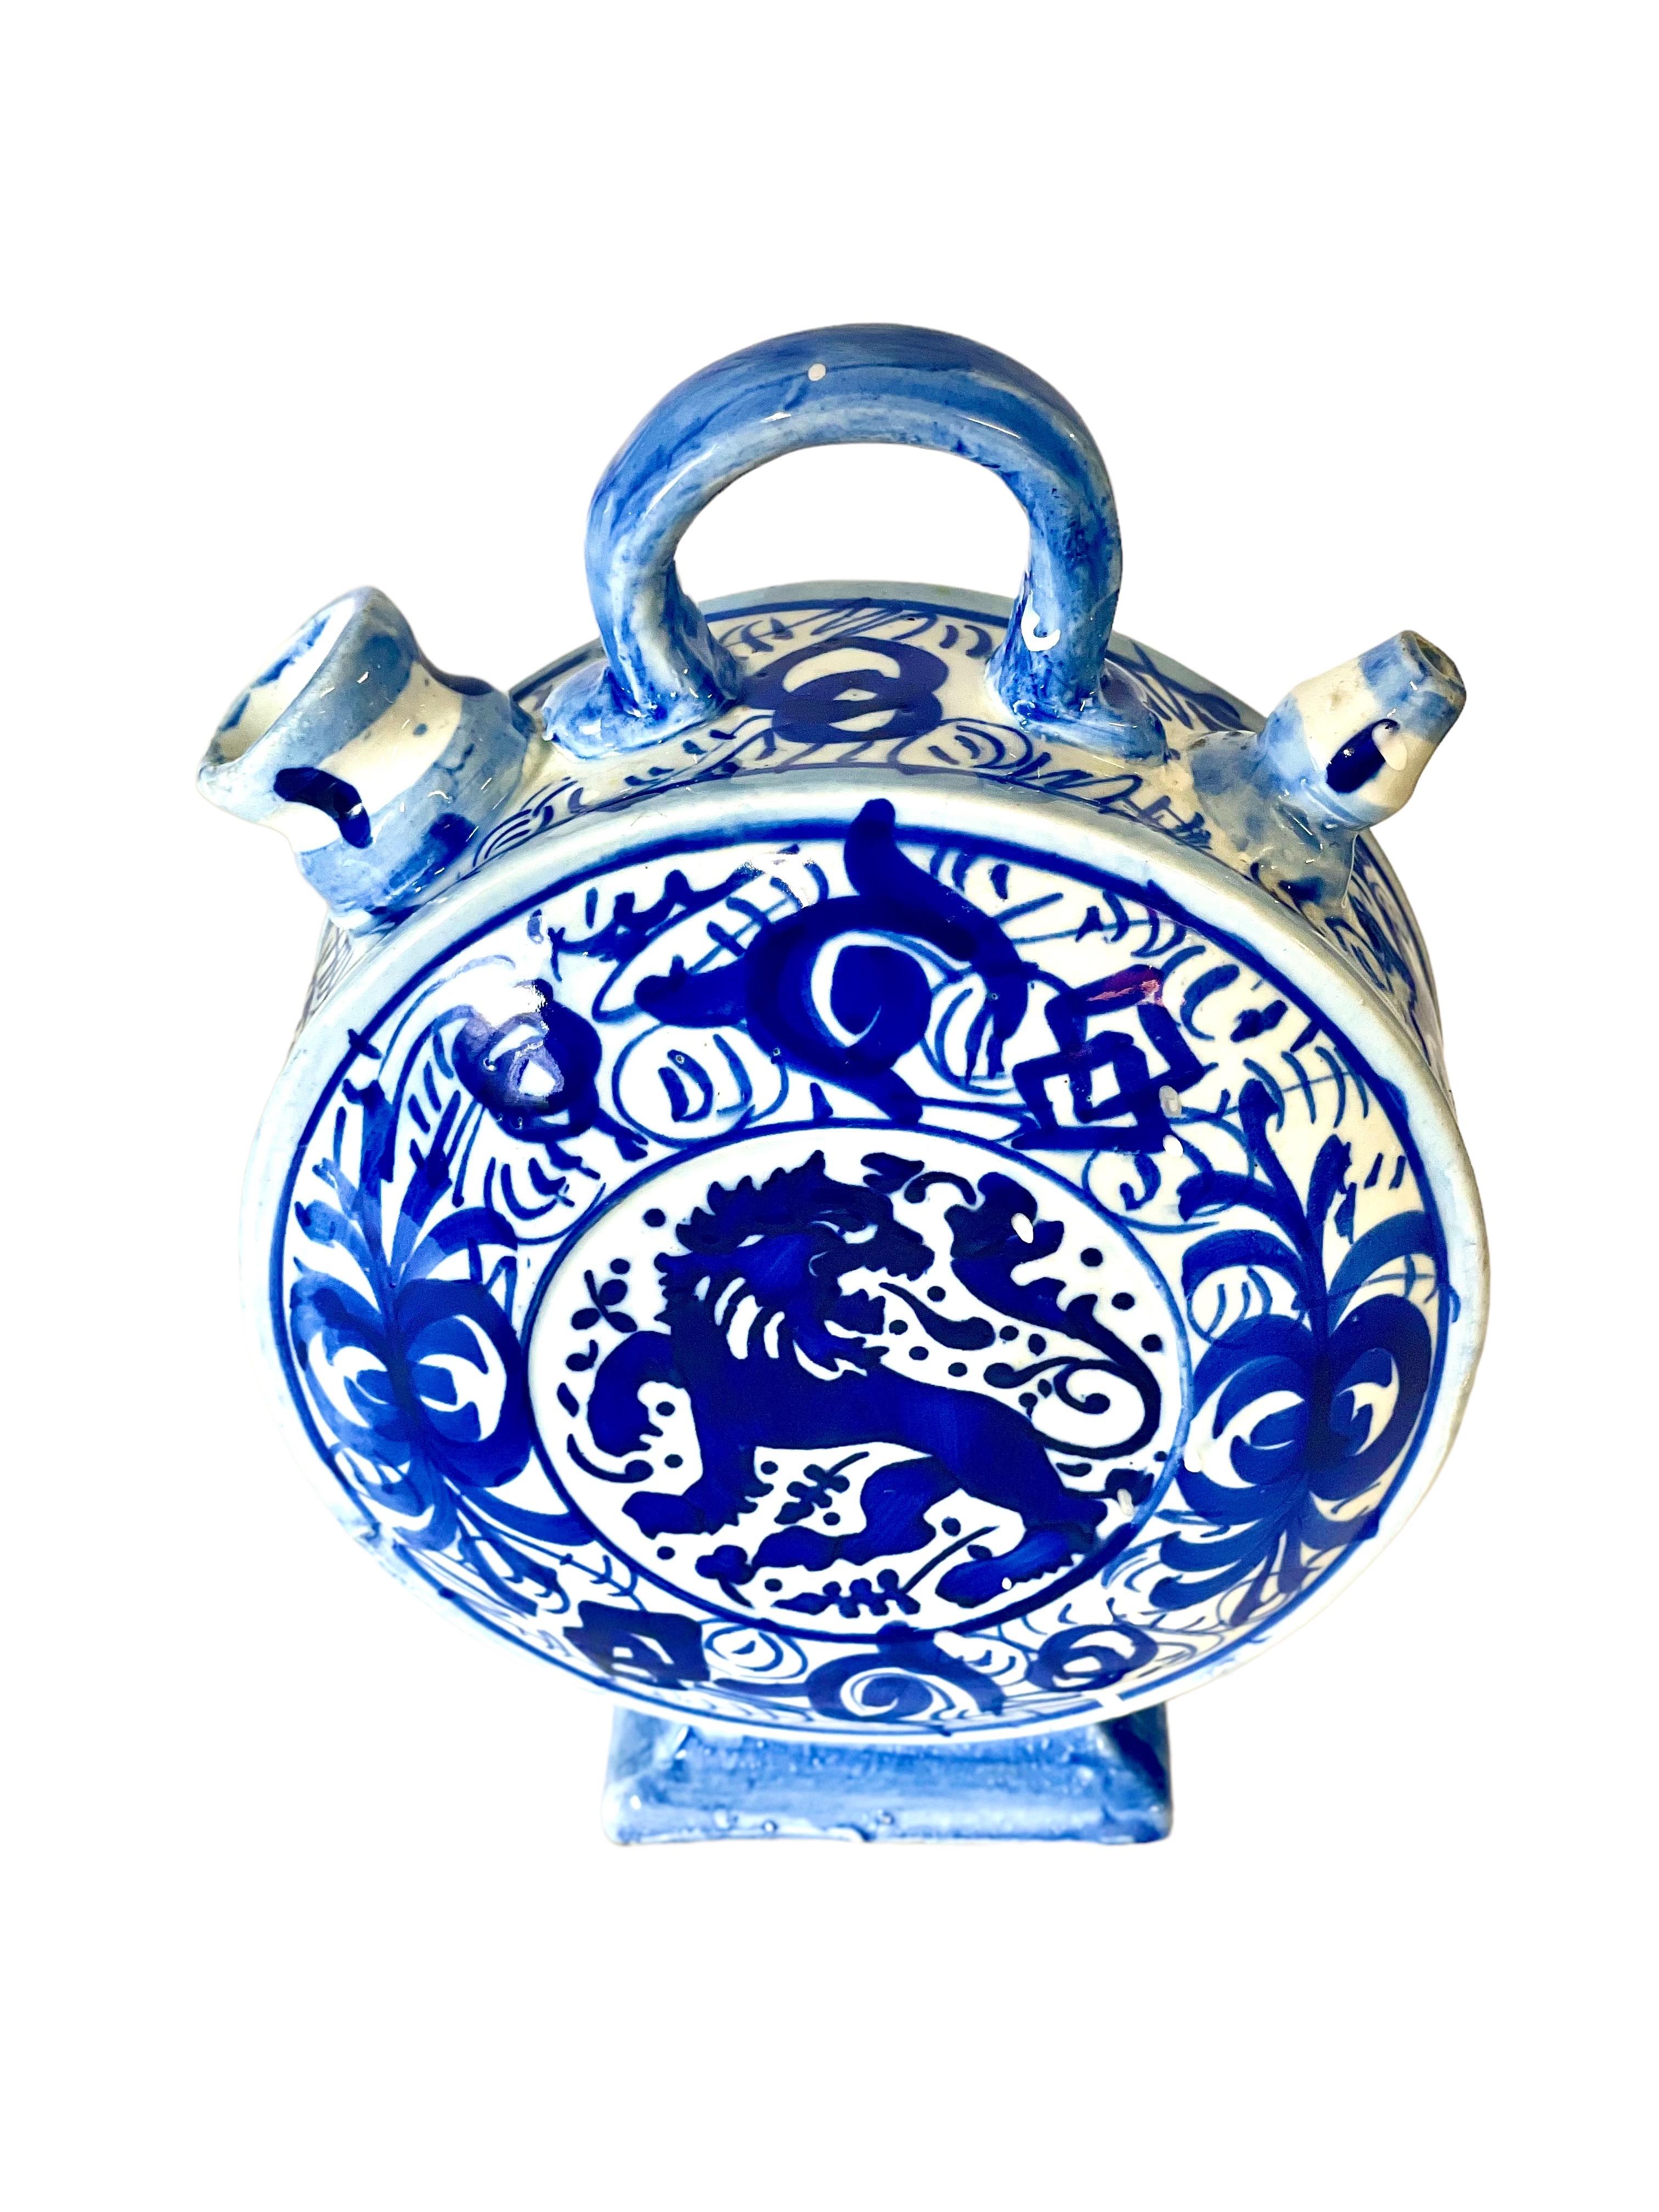 A very unusual and charming earthenware 'Chevrette' cruche, or water pitcher, beautifully hand painted with fantastical animal imagery in vivid blue and white. Commonly used for transporting drinking water by agricultural workers, the design of this